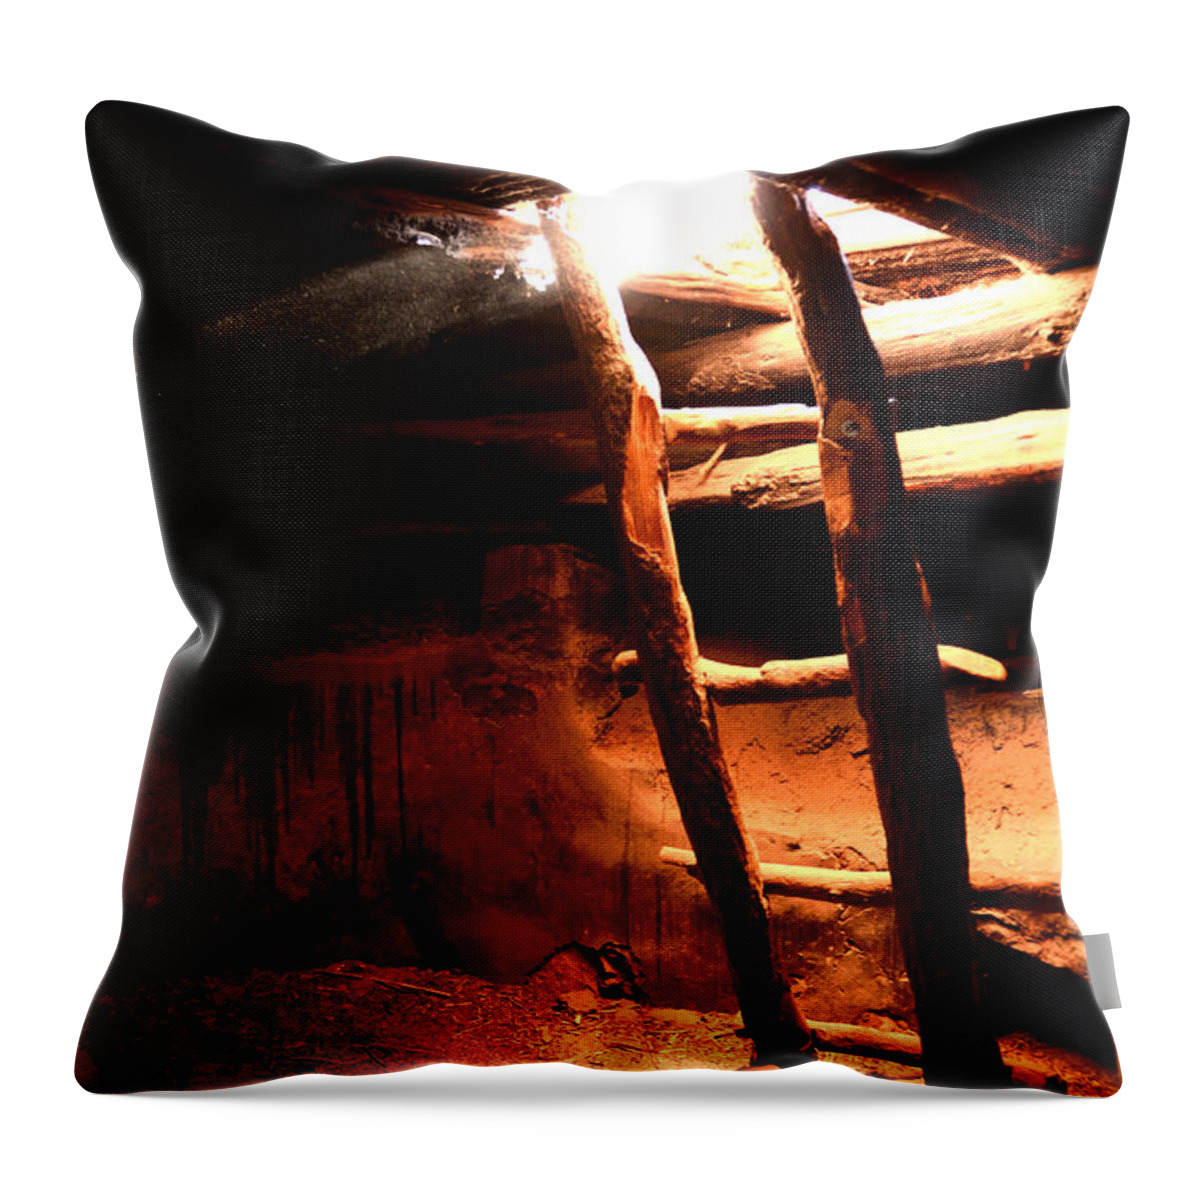 Kiva Throw Pillow featuring the photograph Kiva Ladder by Tranquil Light Photography